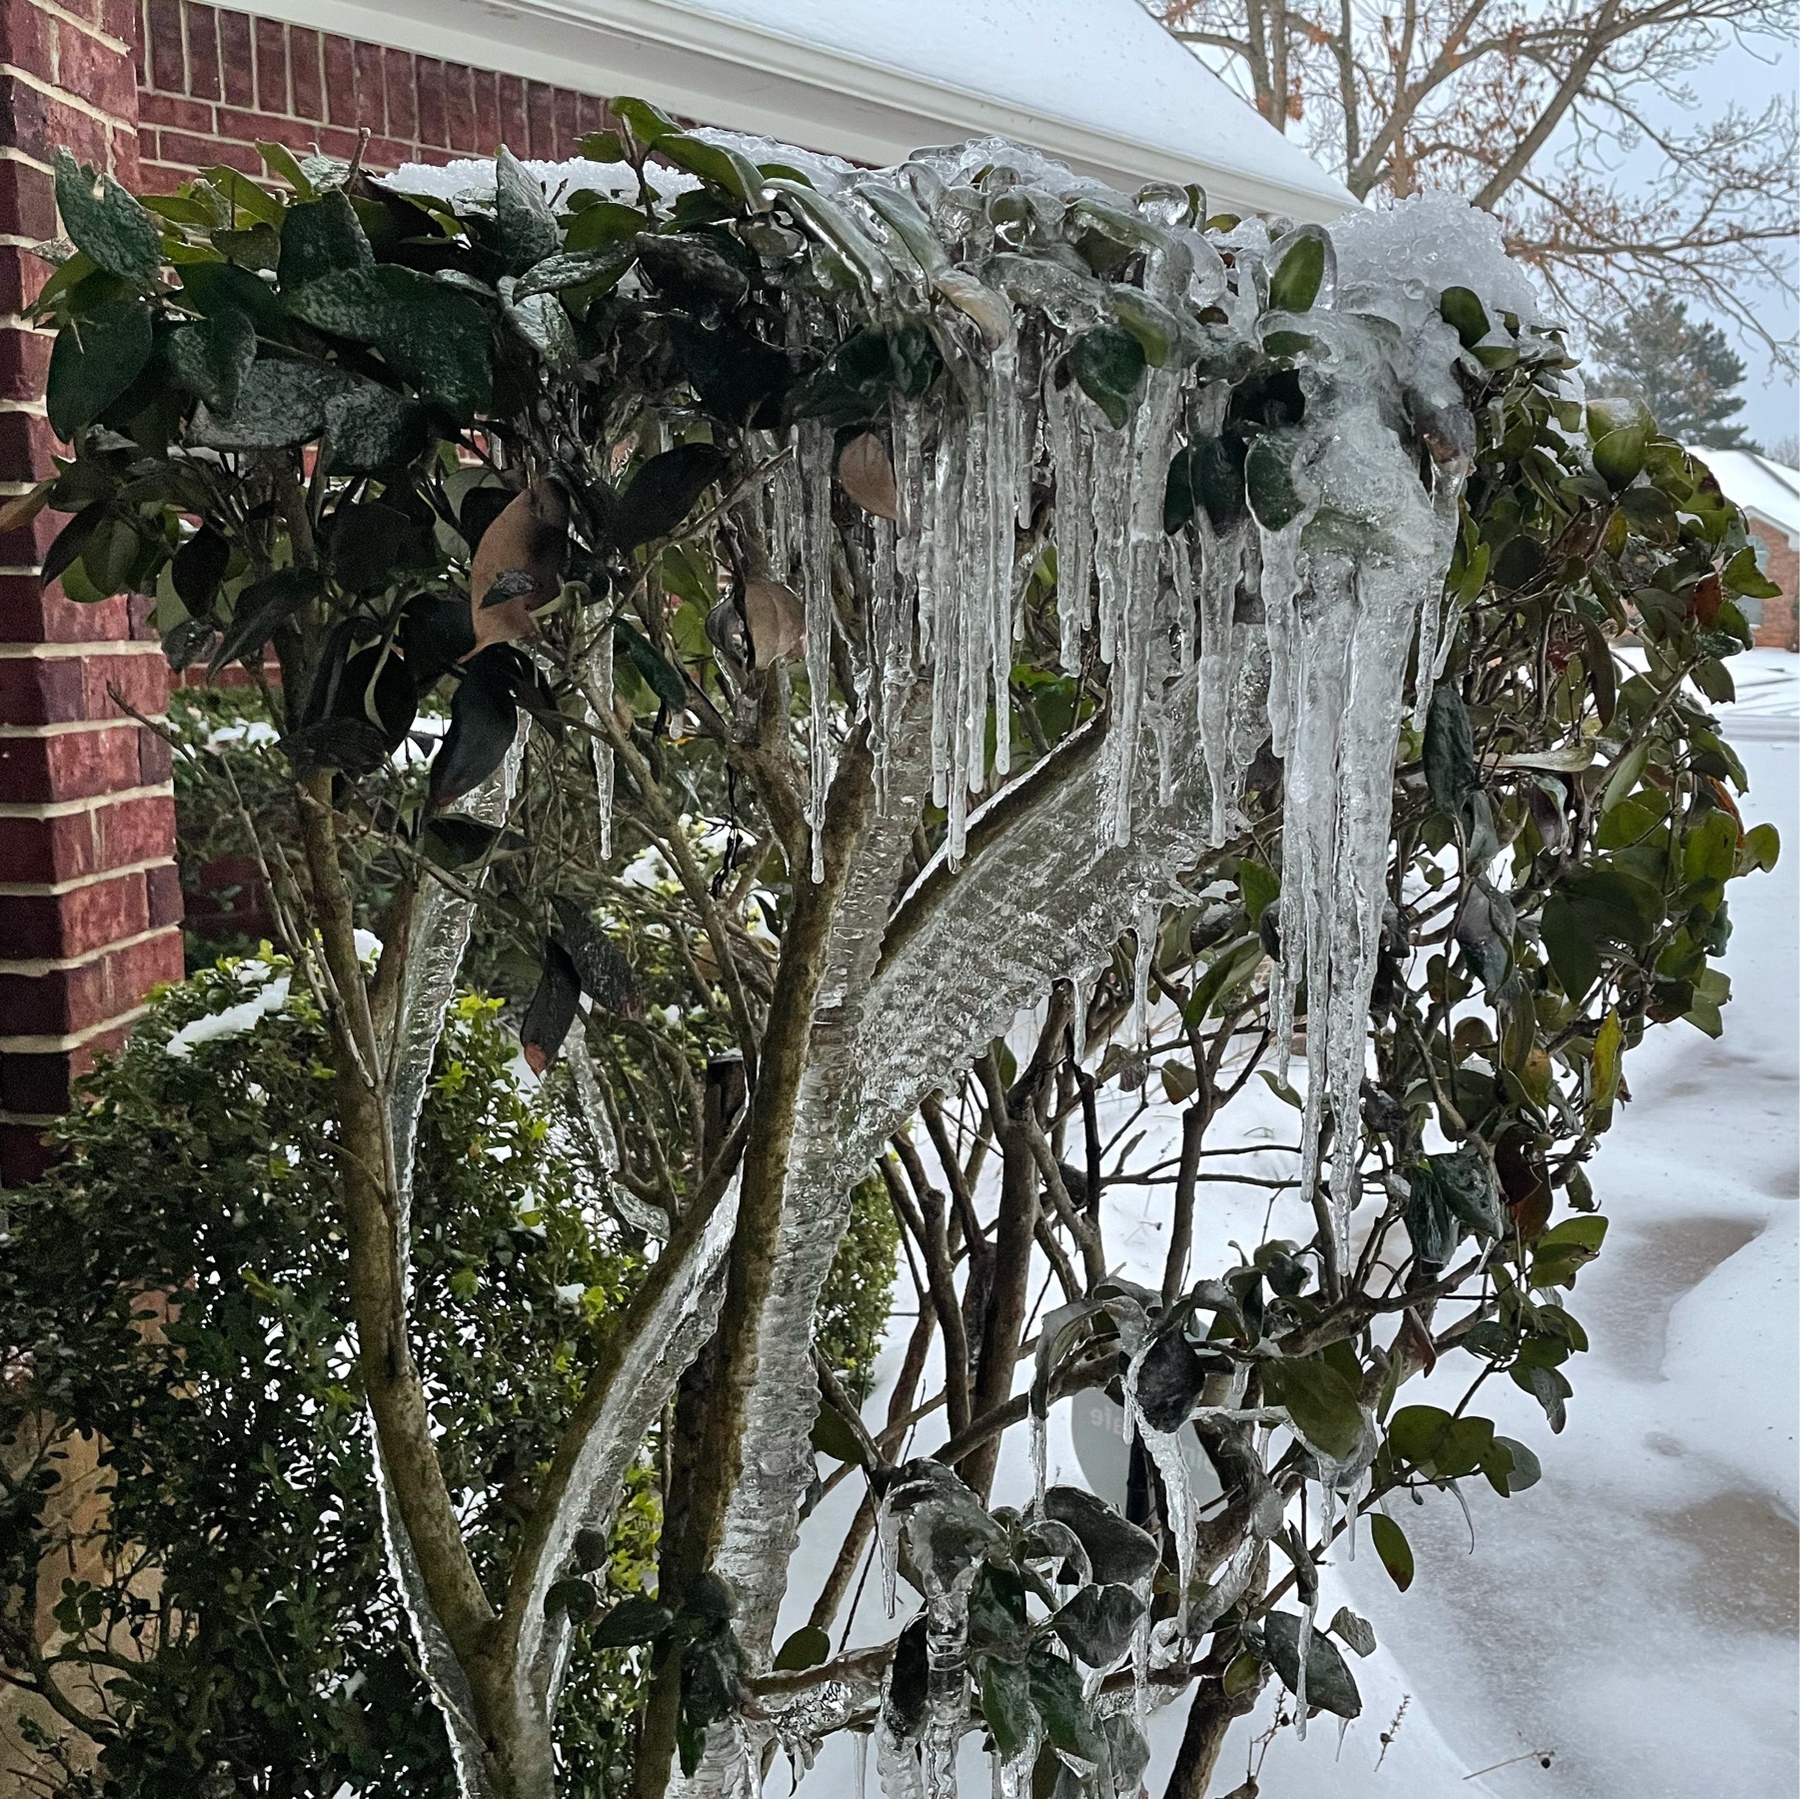 Icicles form on a bush under gutters